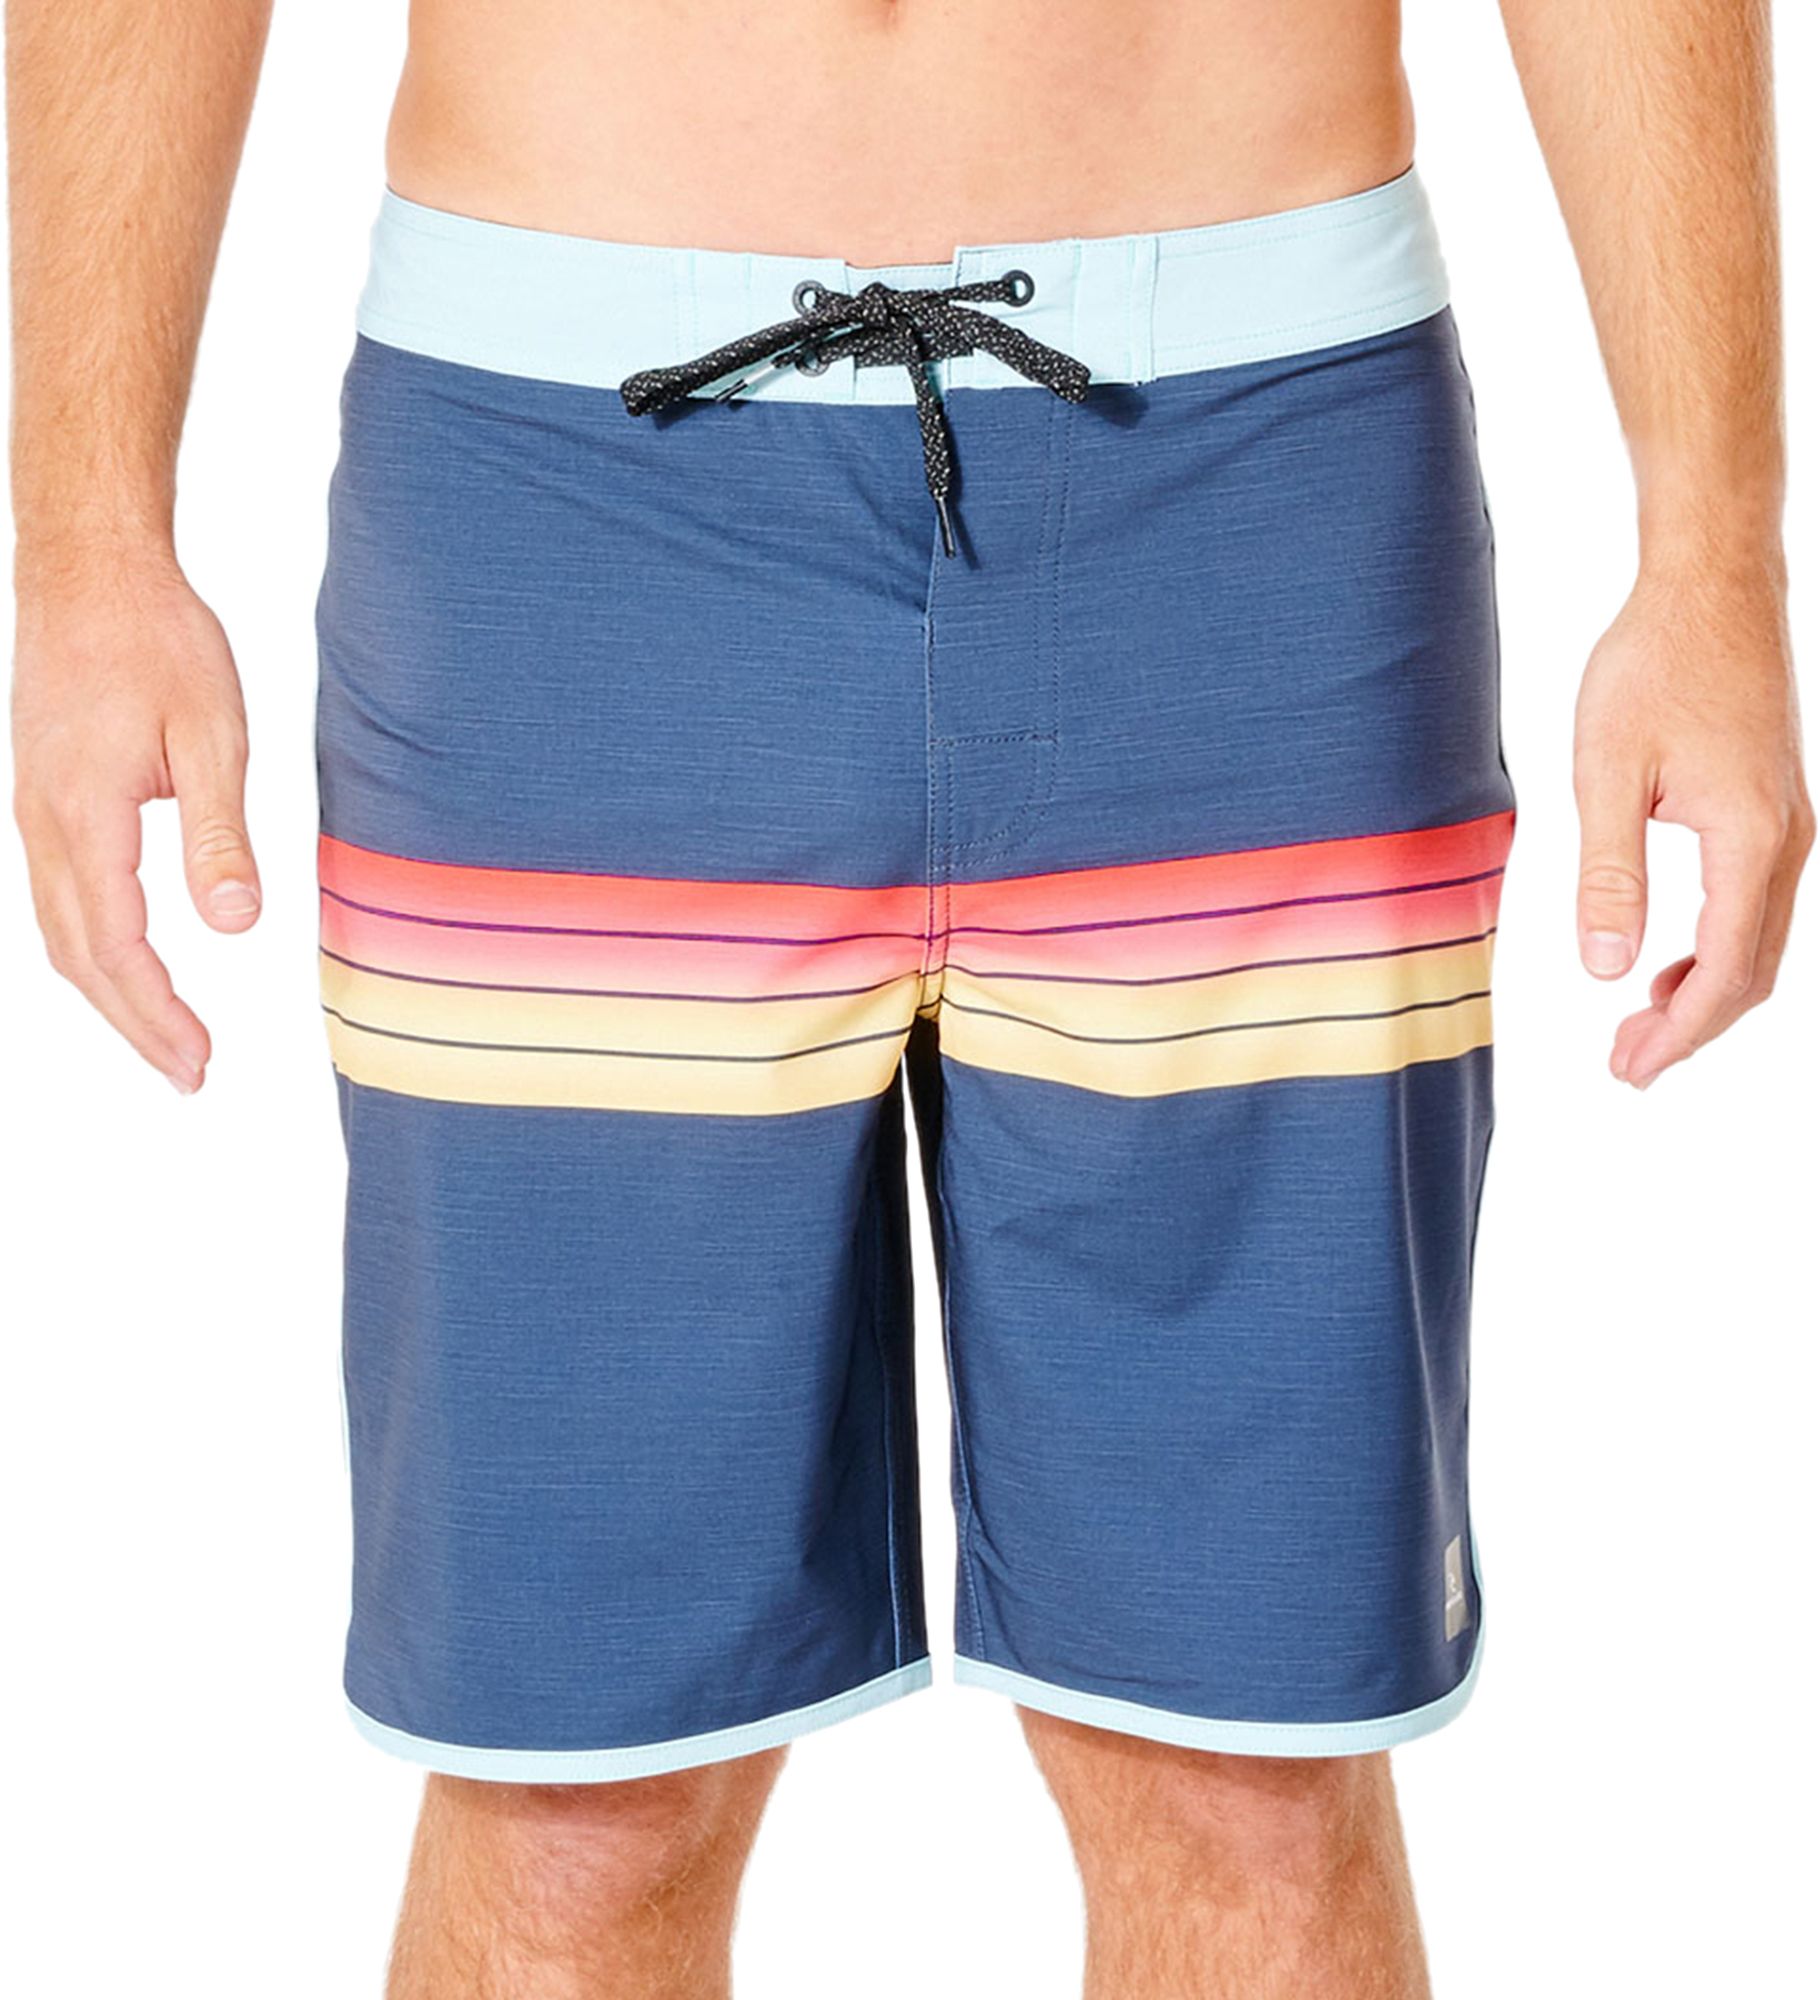 Photos - Swimwear Rip Curl Men's Mirage Surf Revival 19” Board Shorts, Size 36, Navy 21AW9MM 